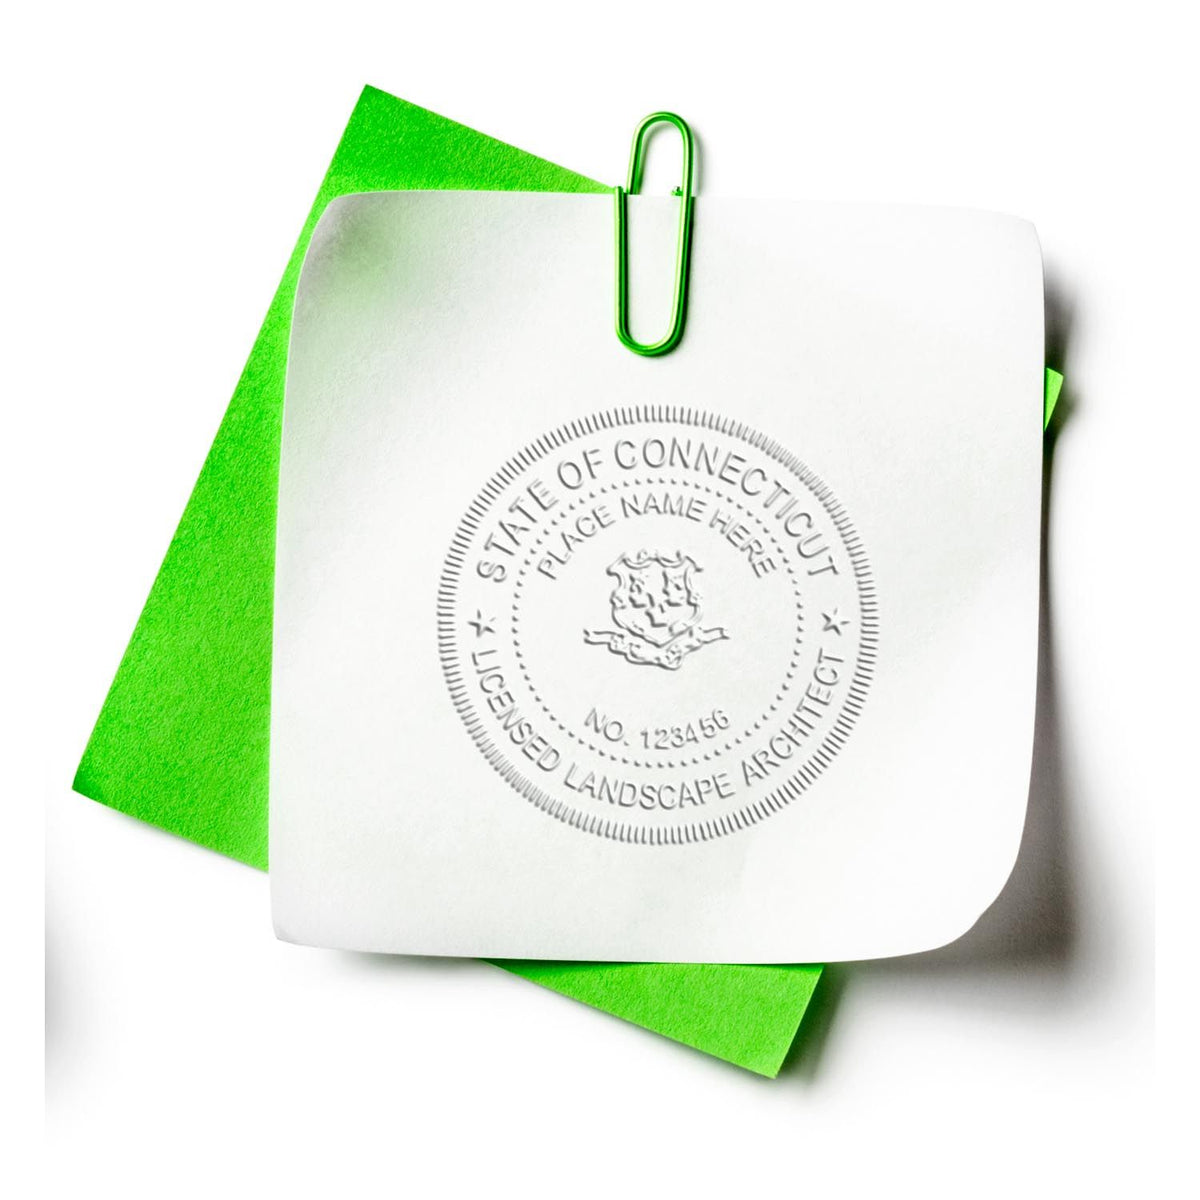 An in use photo of the Gift Connecticut Landscape Architect Seal showing a sample imprint on a cardstock